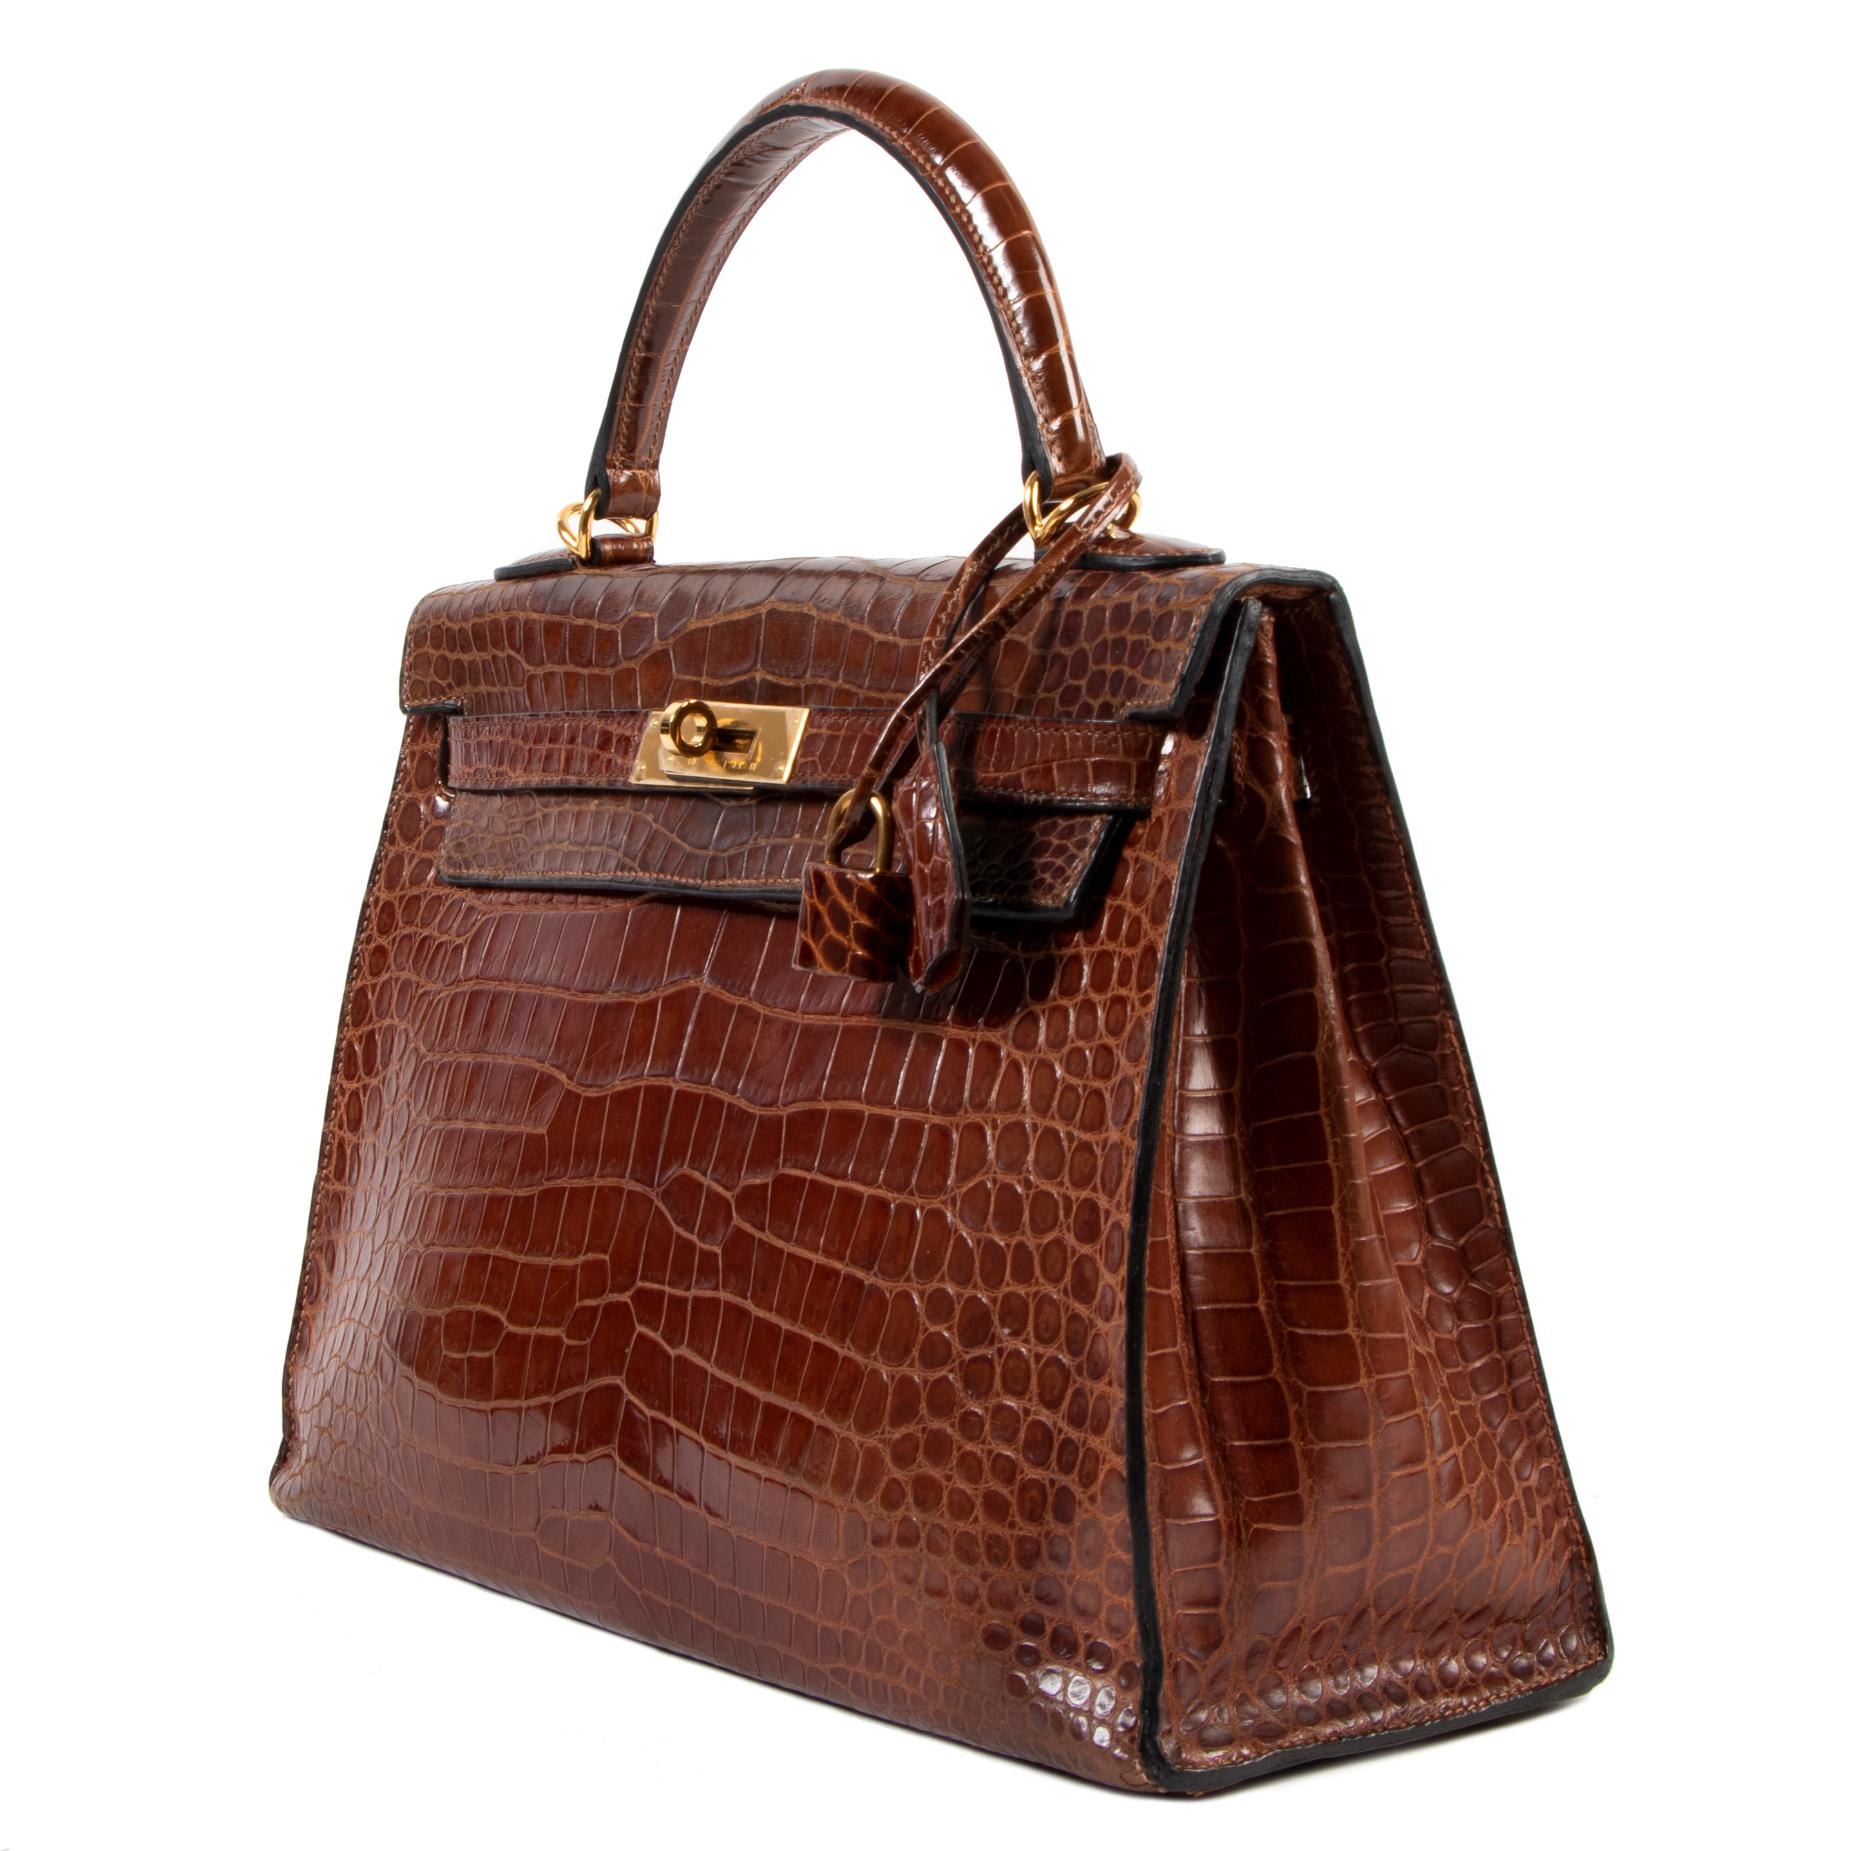 Hermes Kelly 32 Miel Crocodile GHW

A must for any serious collector. 
You will only very seldom see a Kelly bag in this beautiful warm 